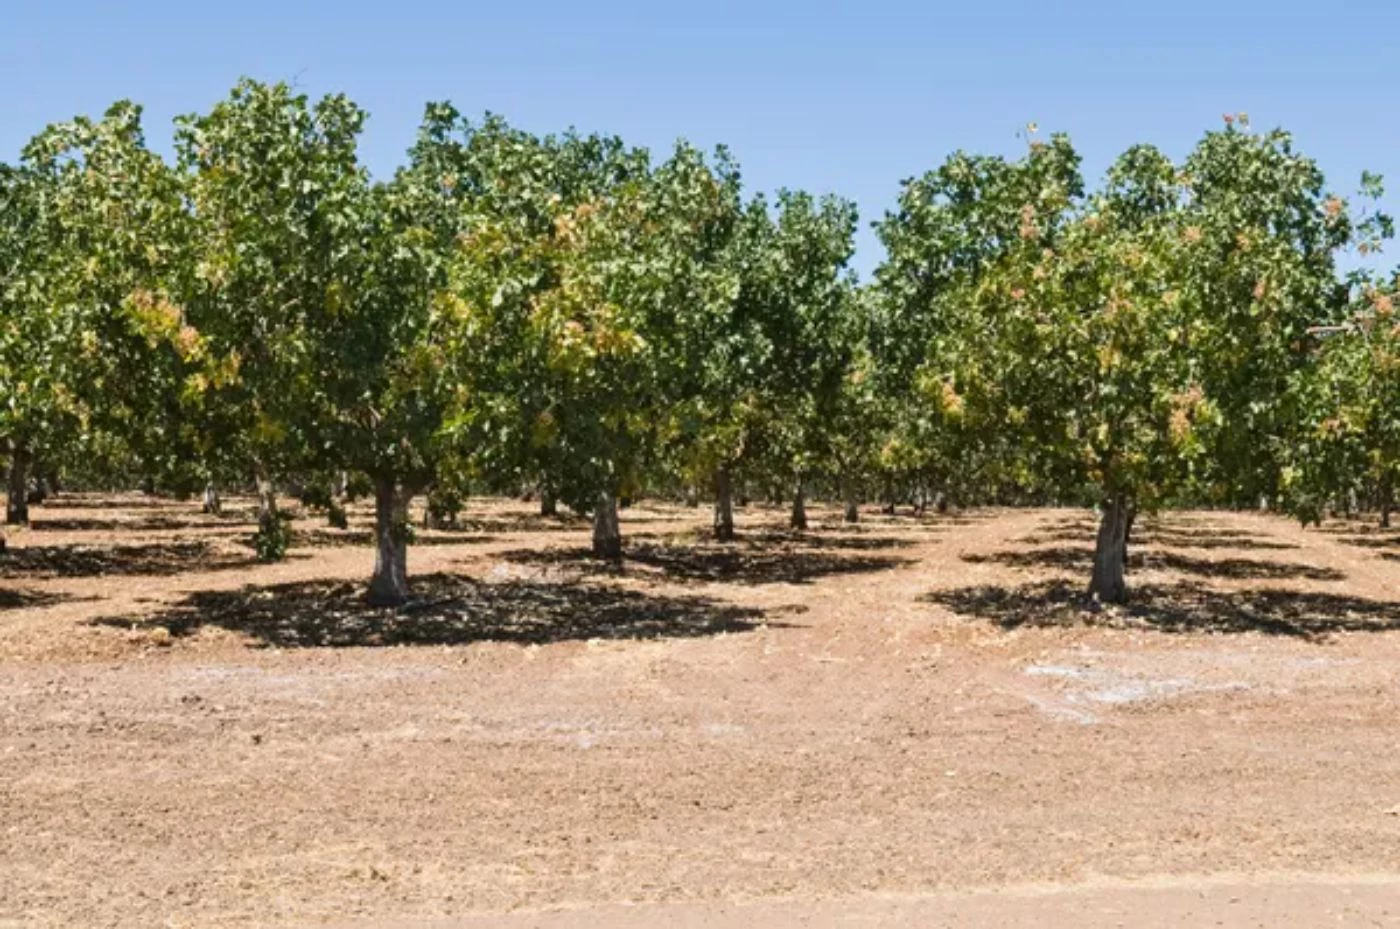 pistachios 1 17 Most Common Nut Trees Types (with Pictures to Identify)